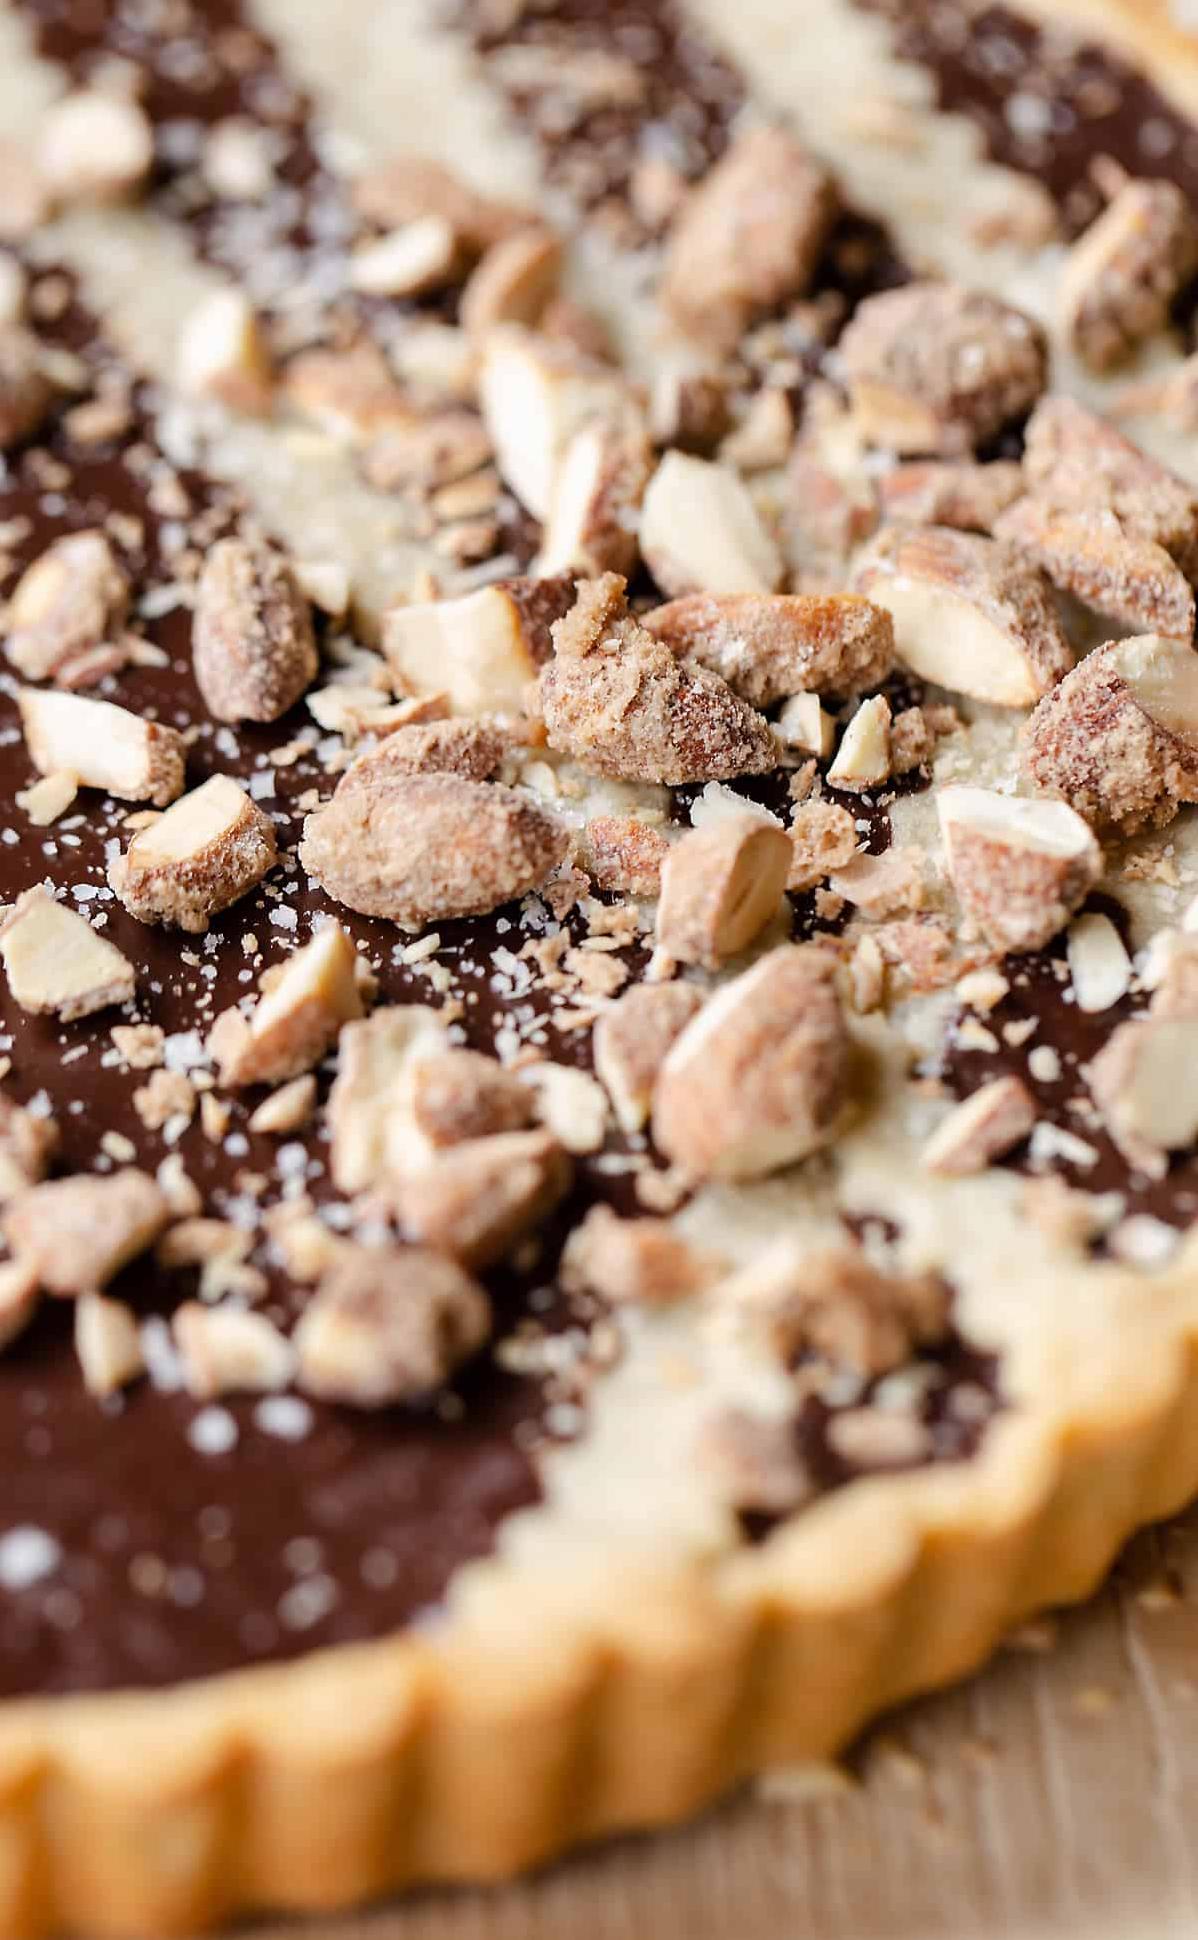  This heavenly chocolate coffee pie will make your taste buds sing.